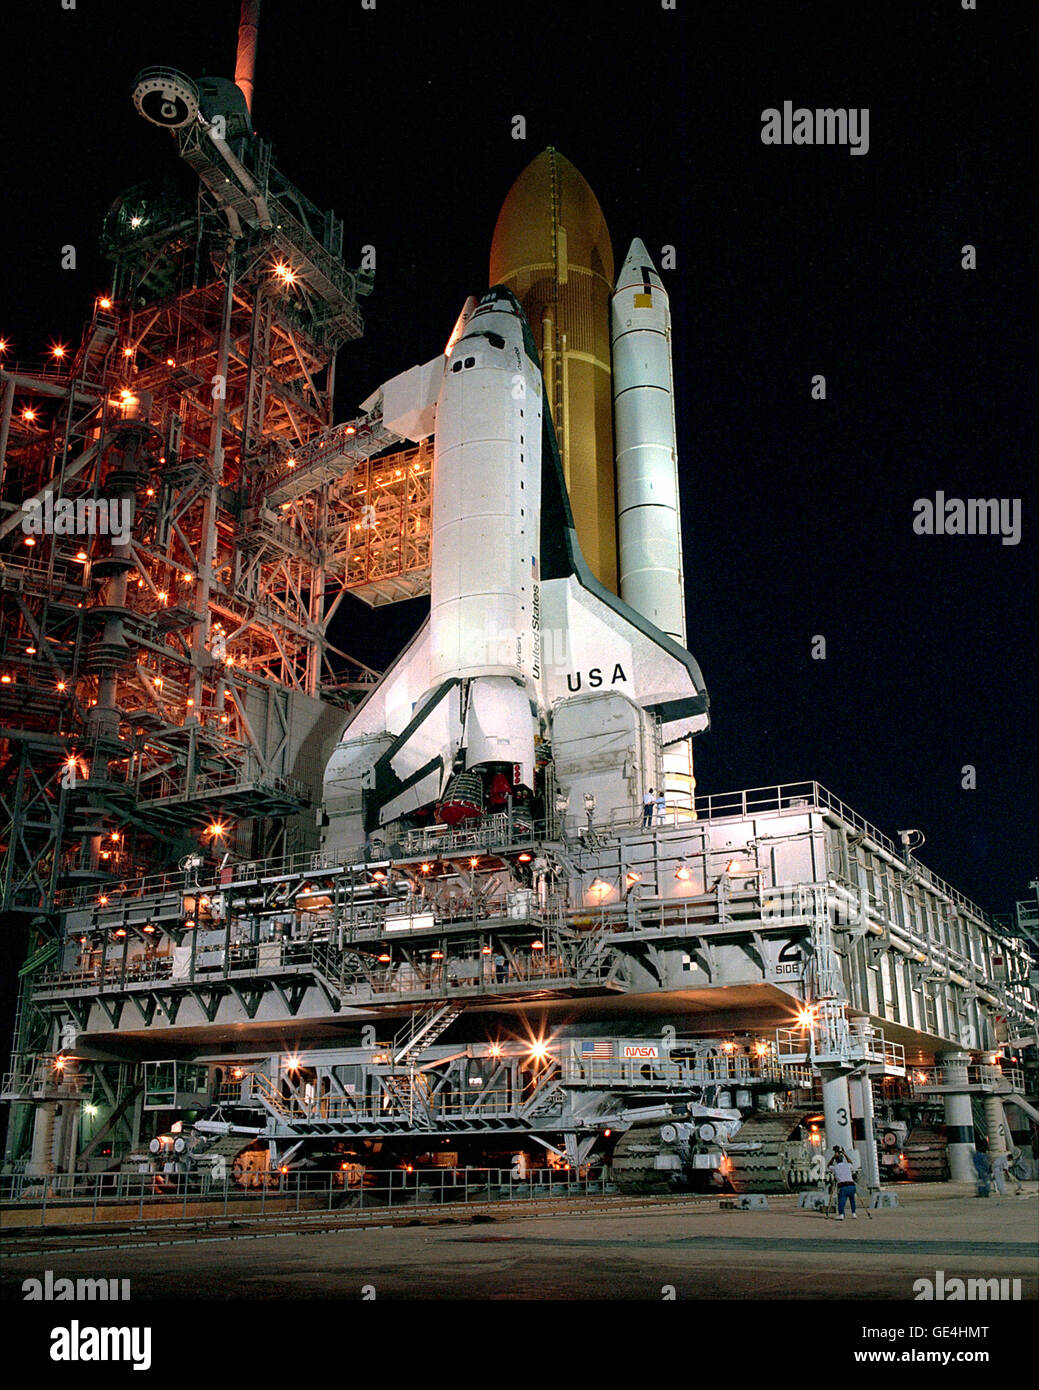 The Space Shuttle Columbia arrives at Pad 39B early in the morning after being rolled out of the Vehicle Assembly Building the night before. Columbia is scheduled for Launch on Space Shuttle Mission STS-28 in late July on a Department of Defense dedicated mission Stock Photo